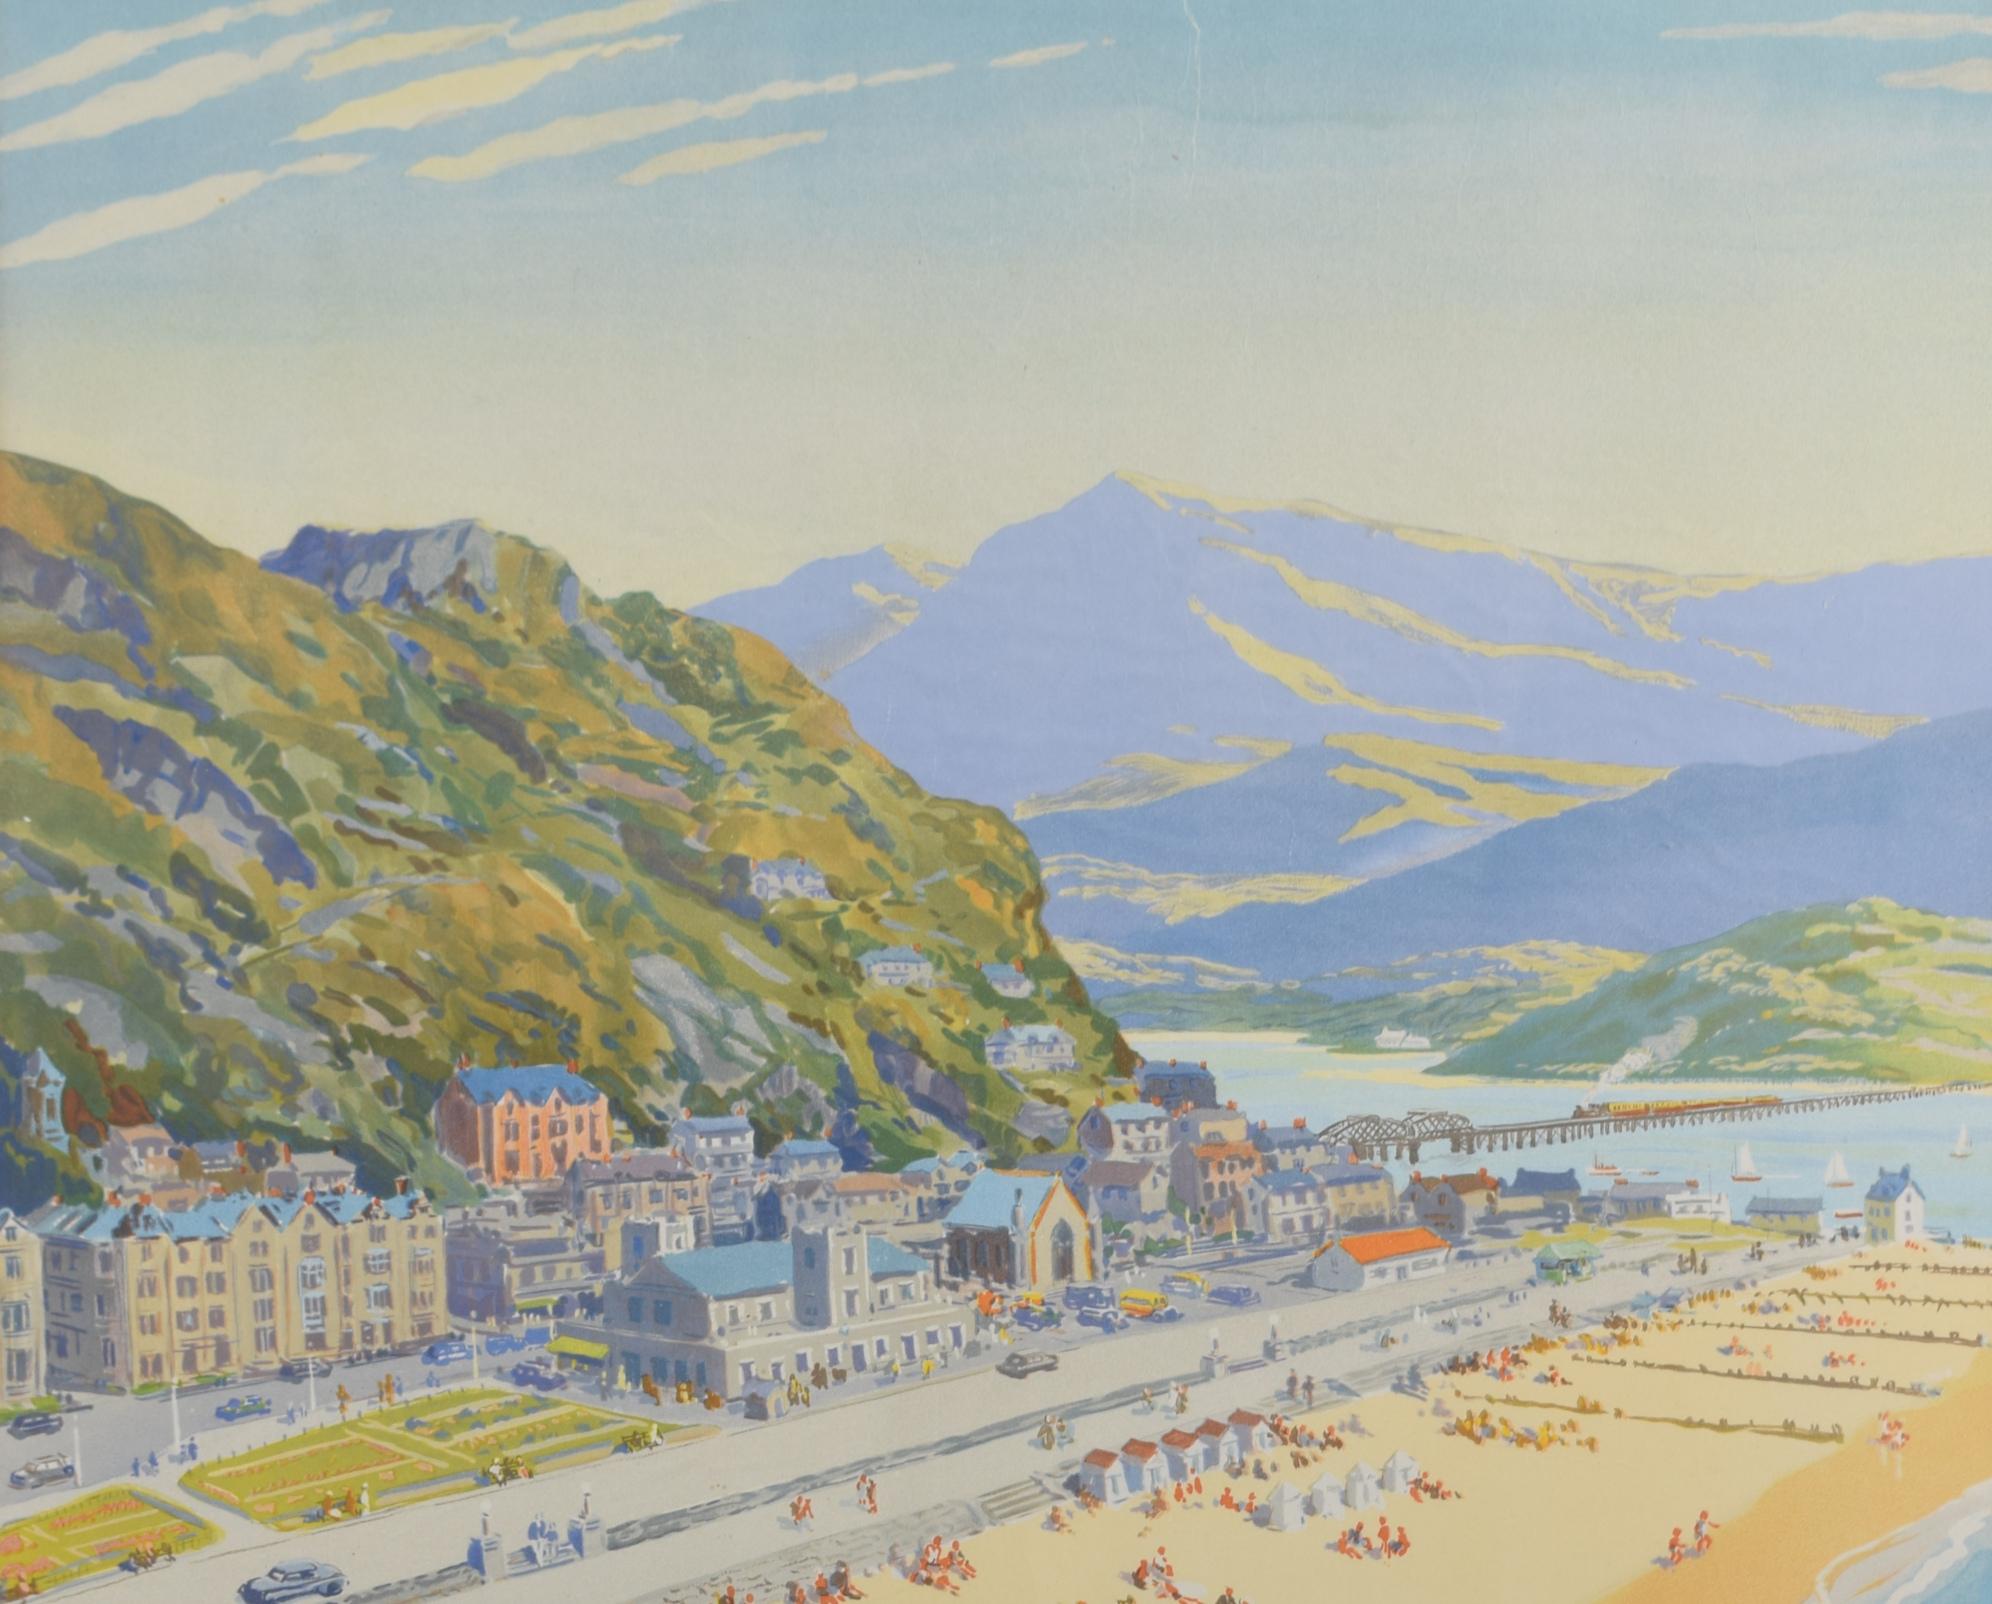 Barmouth, Wales British Railways poster by Harry Riley For Sale 2